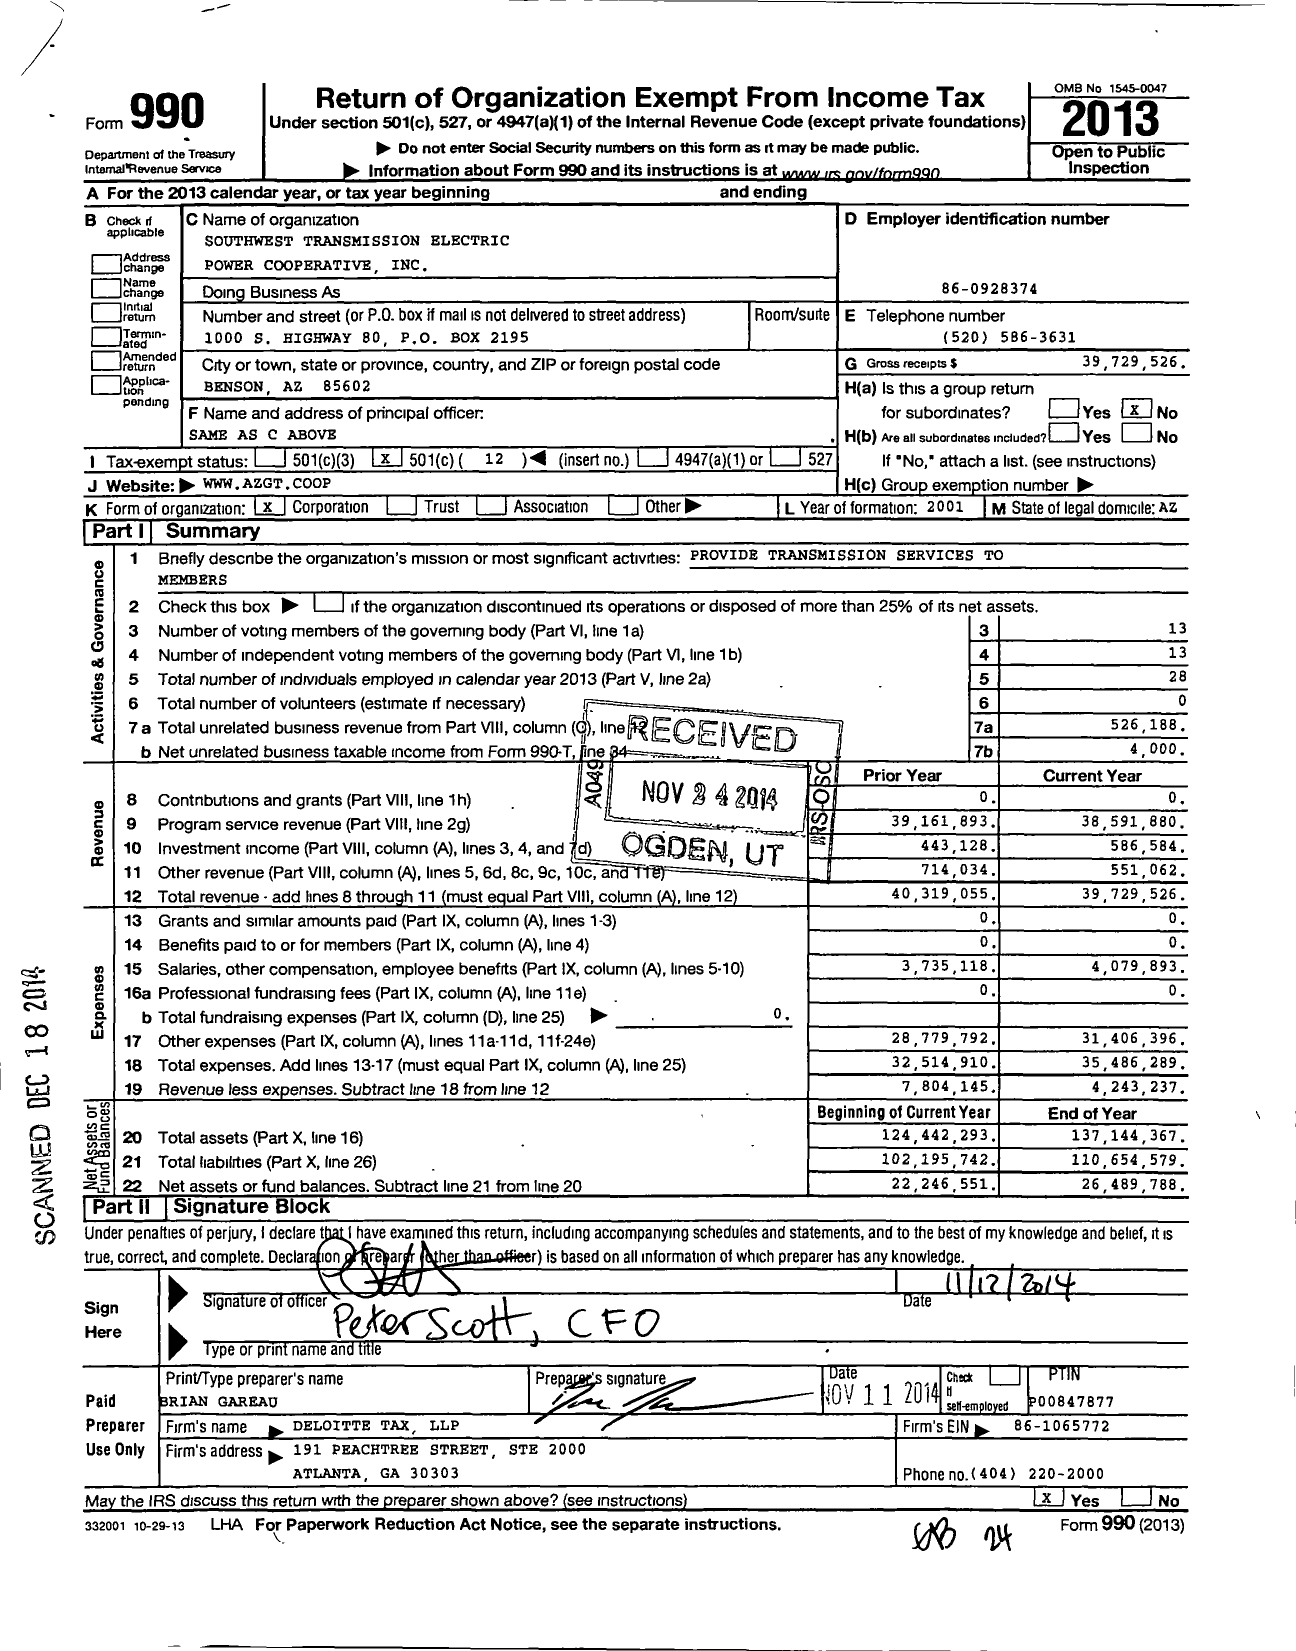 Image of first page of 2013 Form 990O for Southwest Transmission Electric Power Cooperative